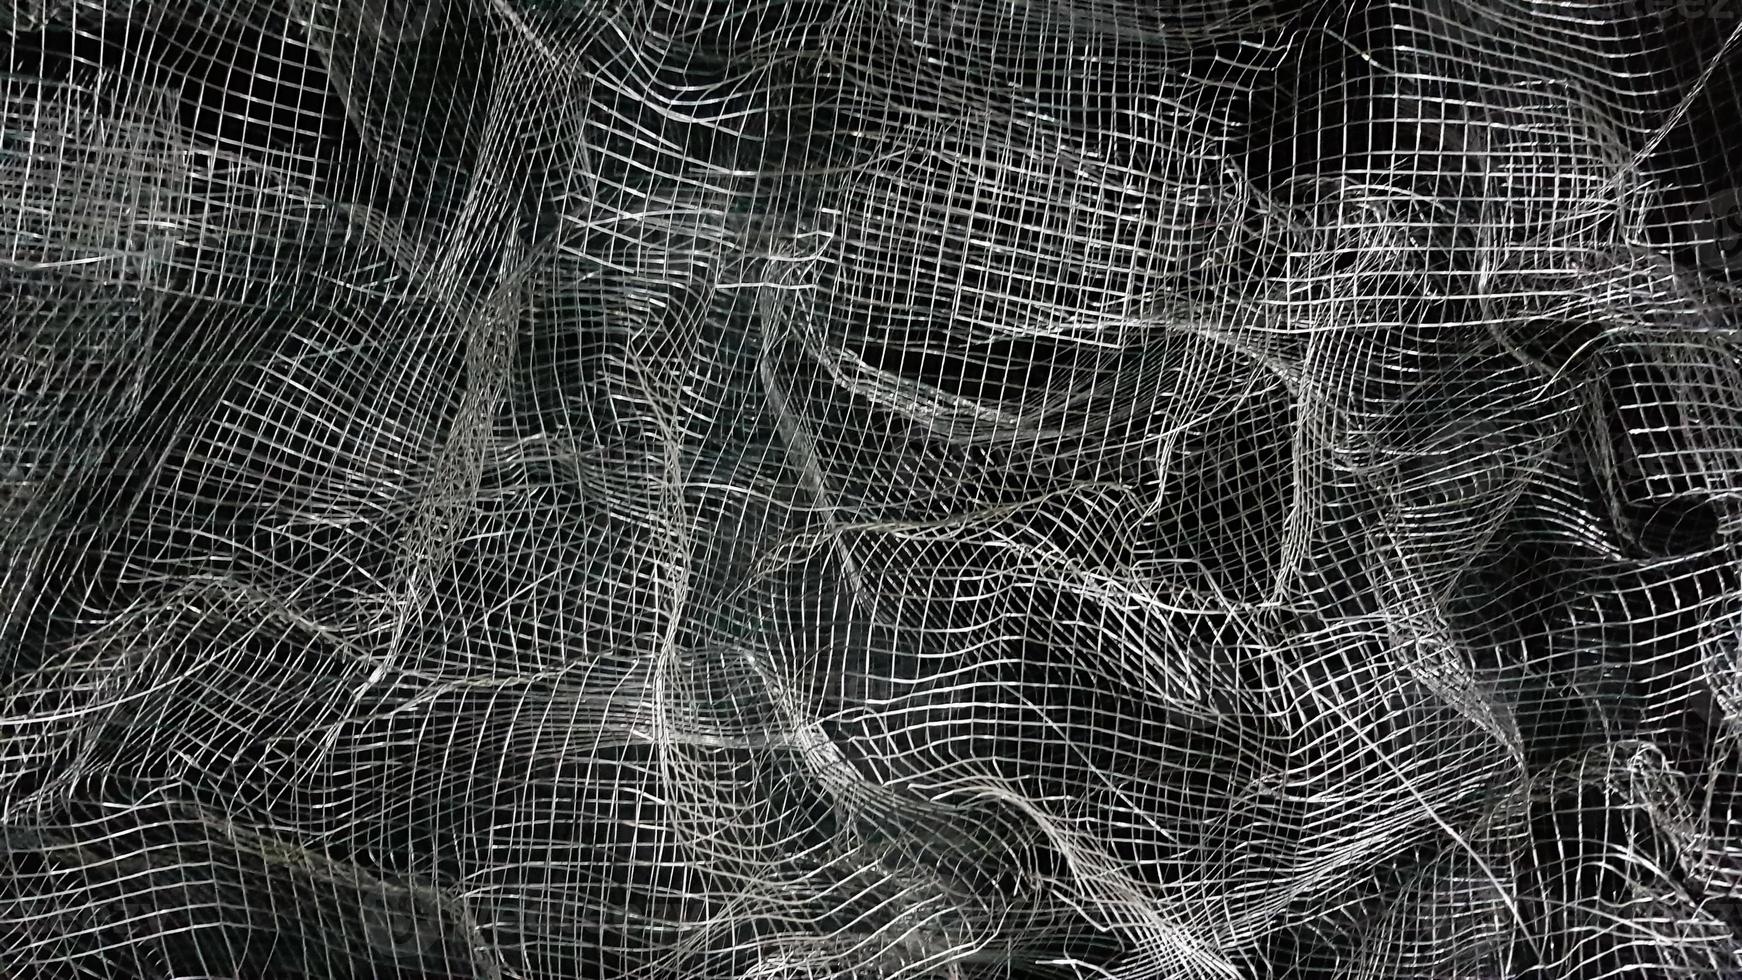 https://static.vecteezy.com/system/resources/previews/004/536/388/non_2x/crumpled-mesh-abstract-background-metal-mesh-with-shadow-on-a-black-background-the-surface-of-a-large-roll-is-damaged-by-wire-mesh-photo.jpg